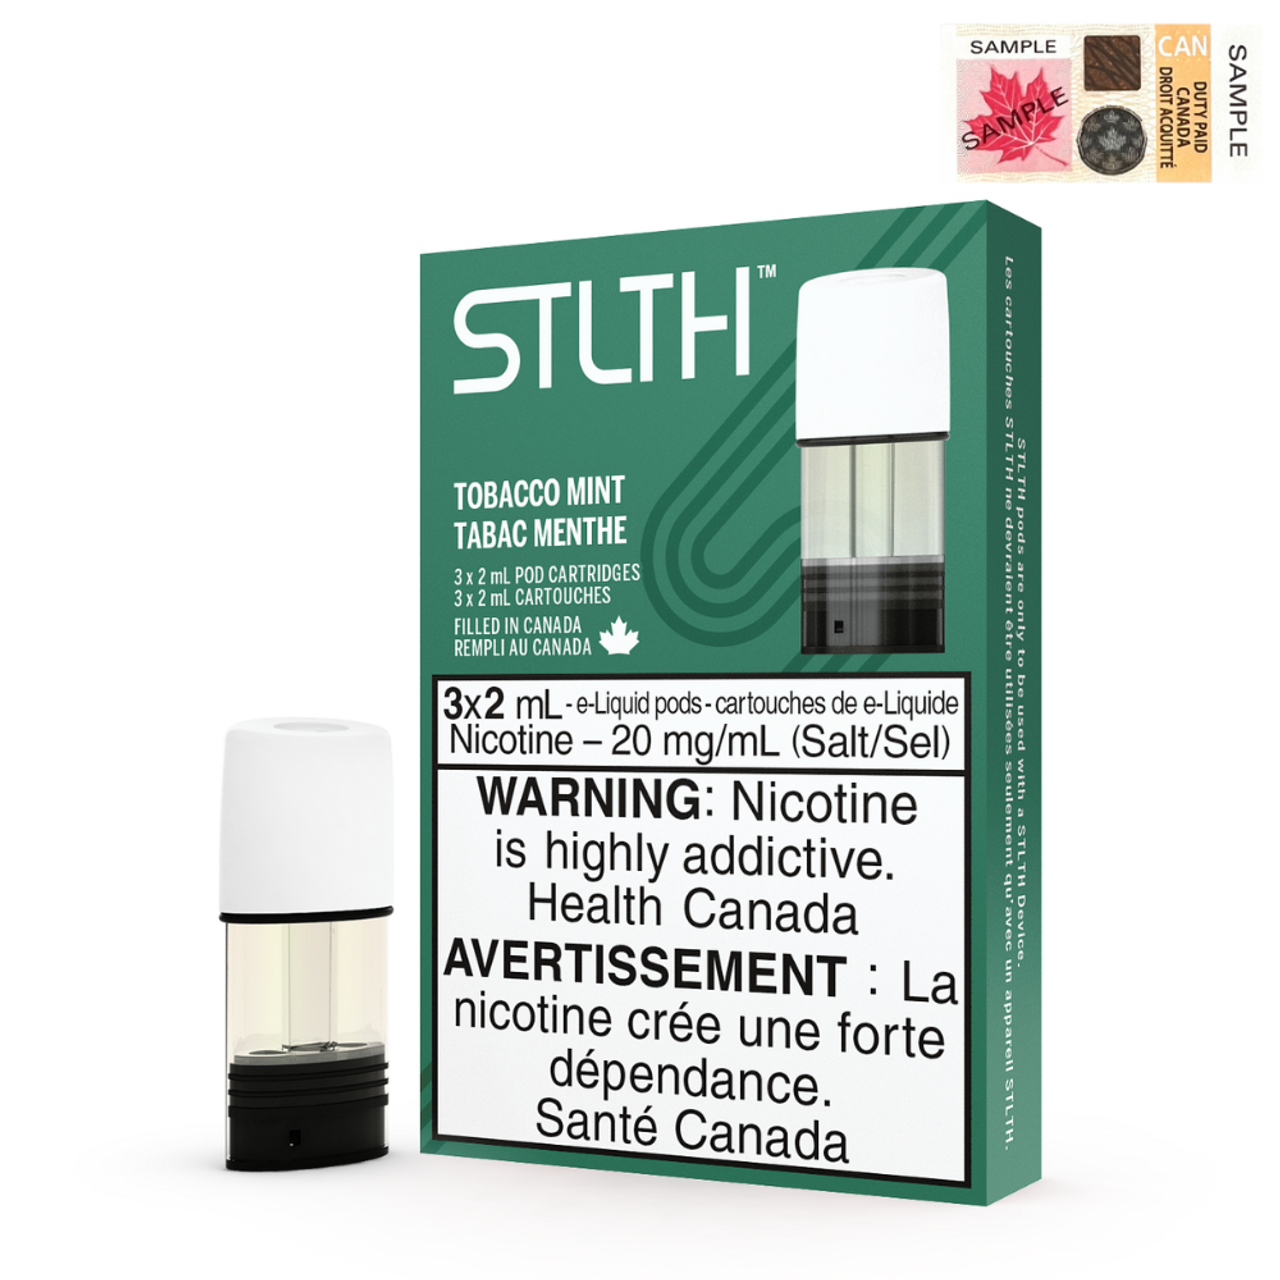 Tobacco Mint (Stamped) STLTH Regular Pods Pack of 3 - B.C-Q.C Compliance